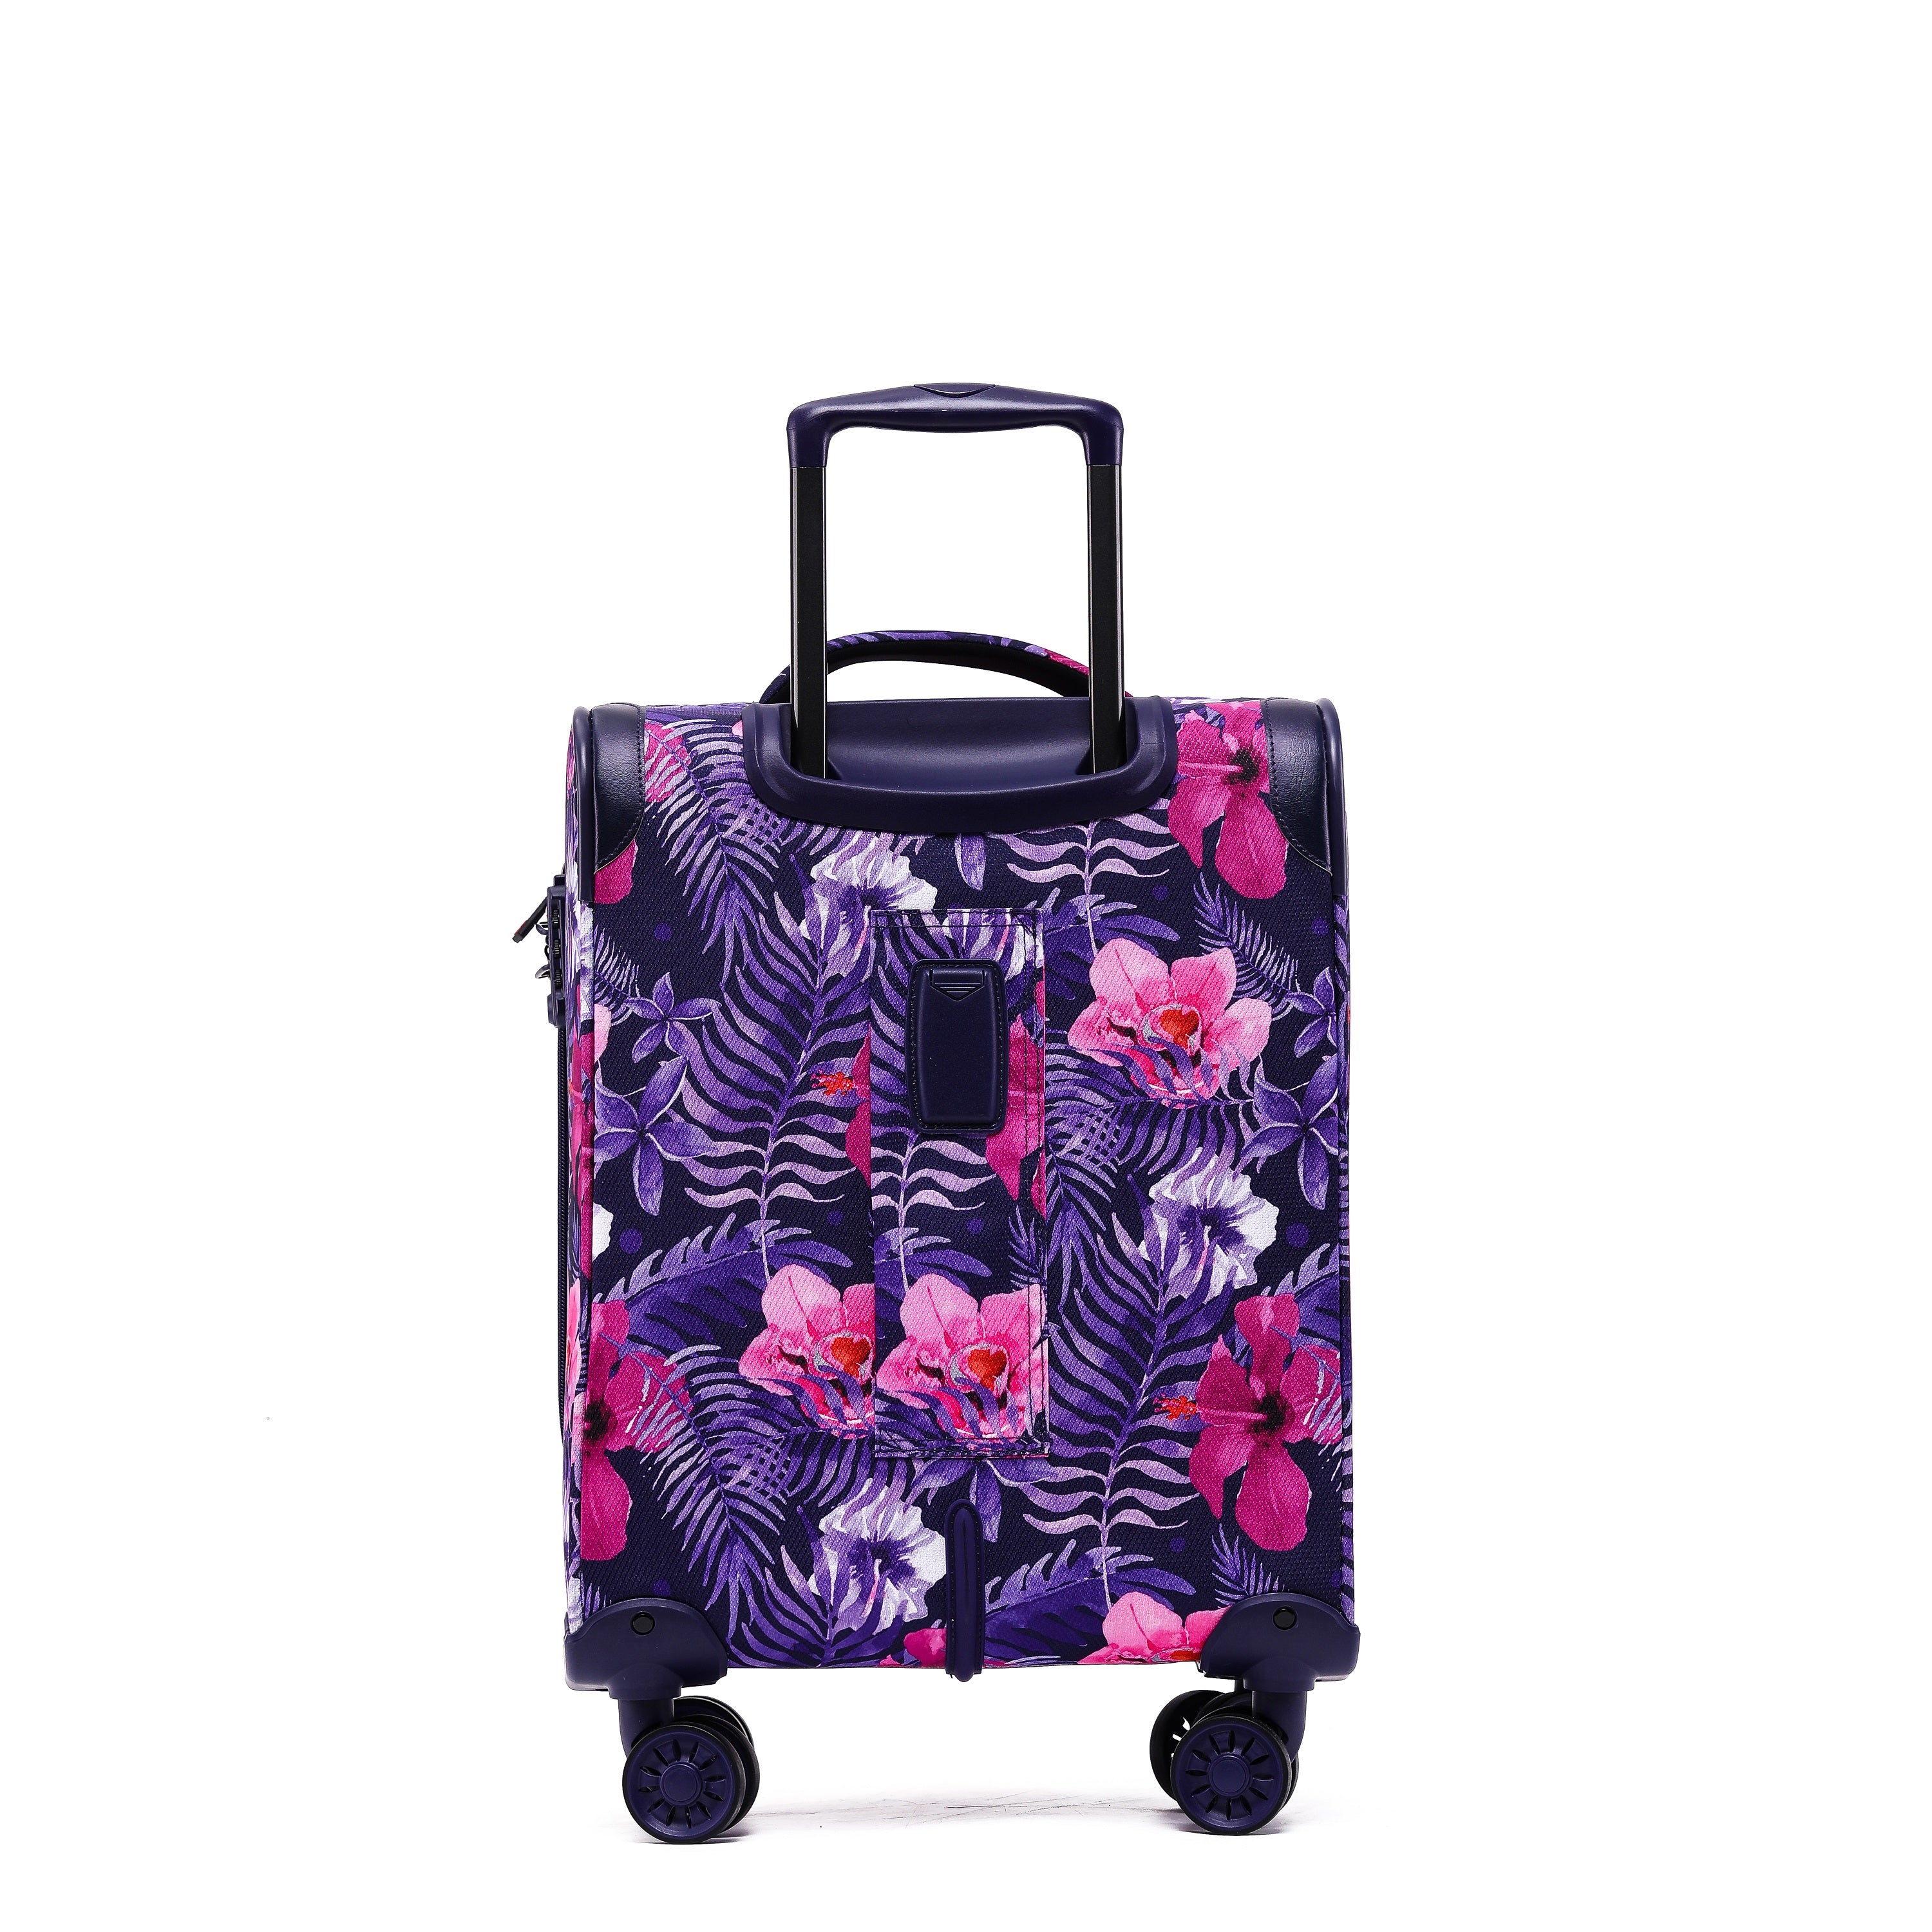 Tosca - So Lite 3.0 20in Small 4 Wheel Soft Suitcase - Flower-2